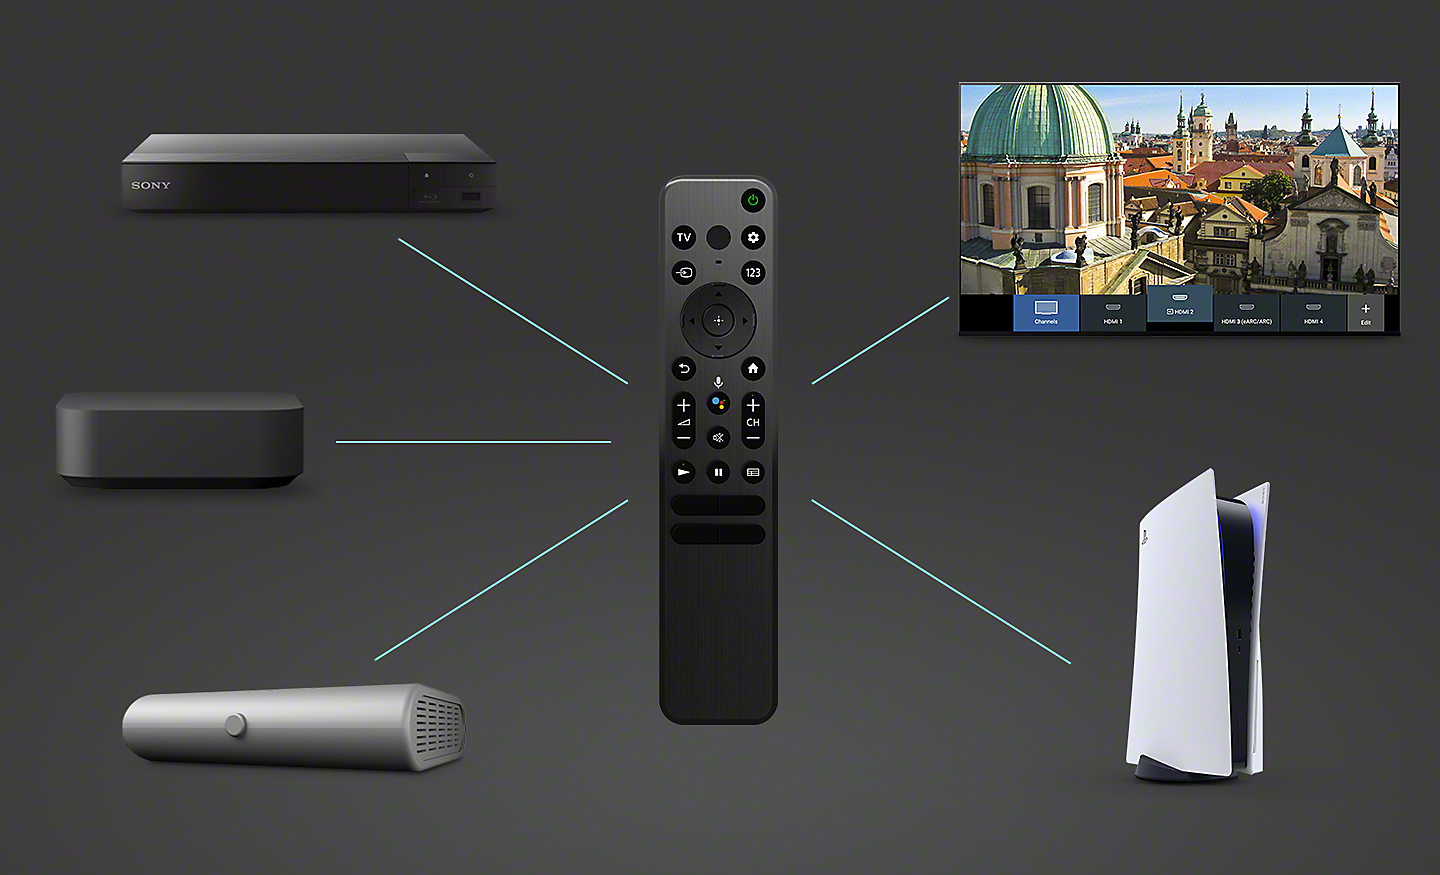 Image showing how all connected devices can be controlled using one smart remote